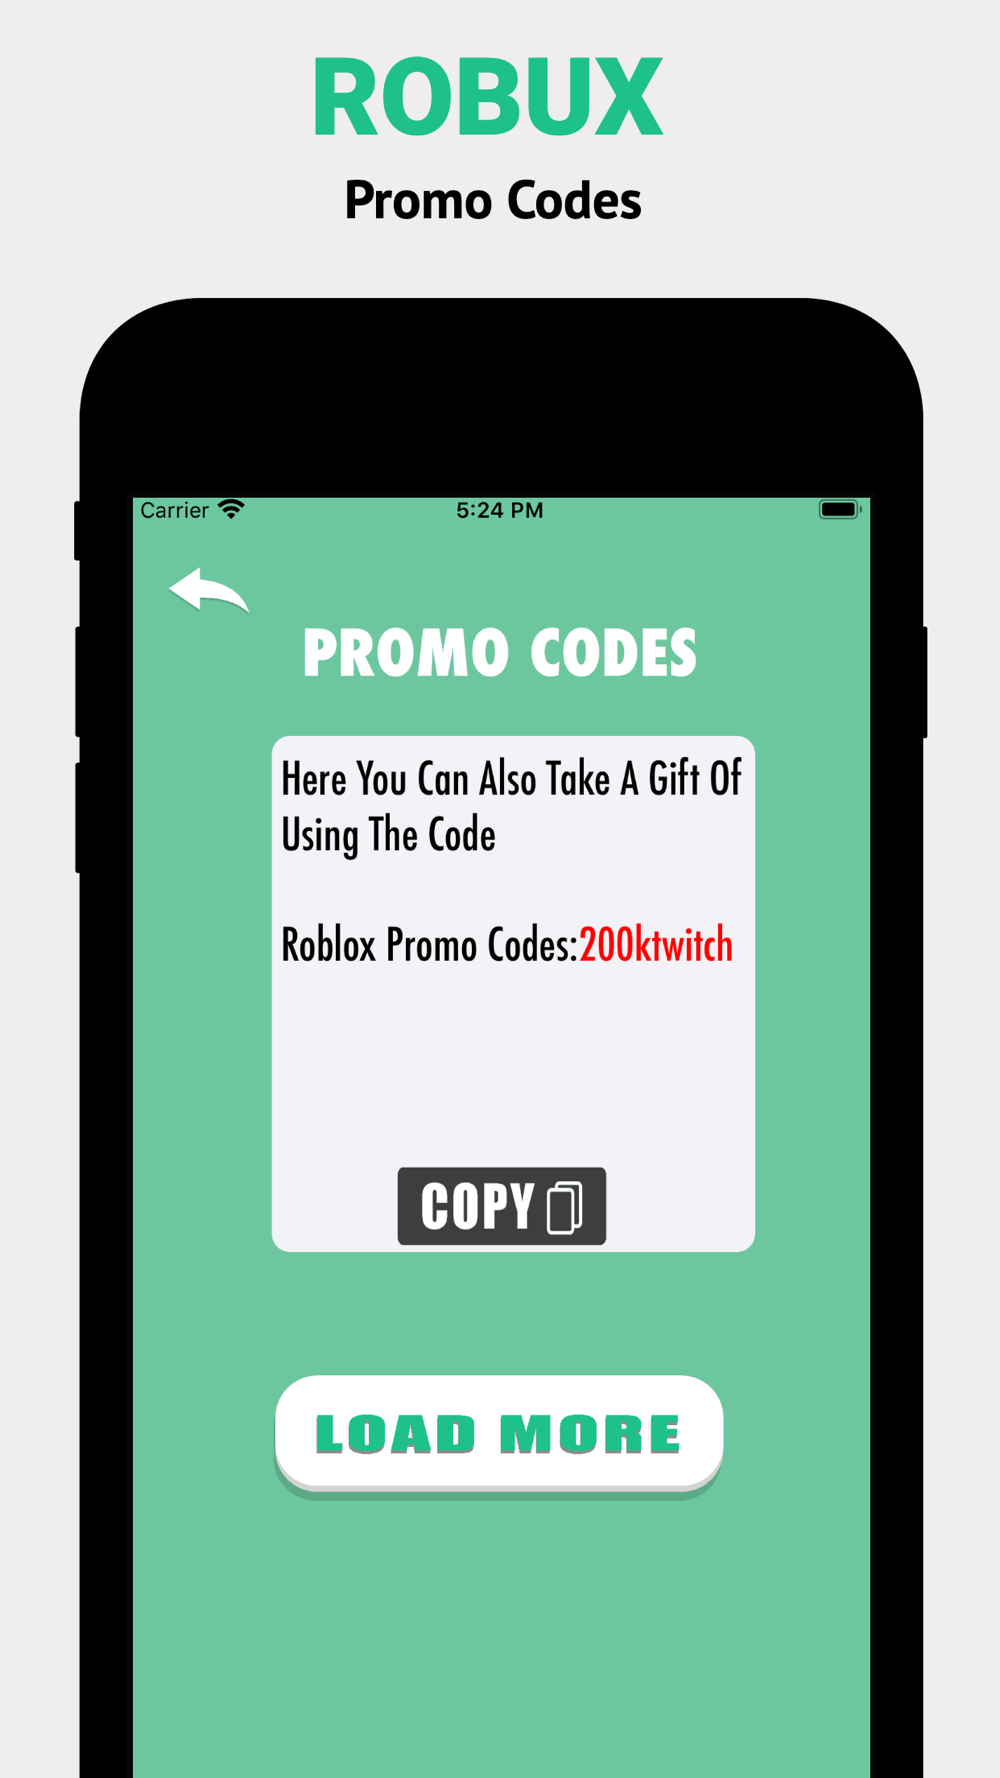 Robux Promo Codes For Roblox Free Download App For Iphone Steprimo Com - promocode roblox robux